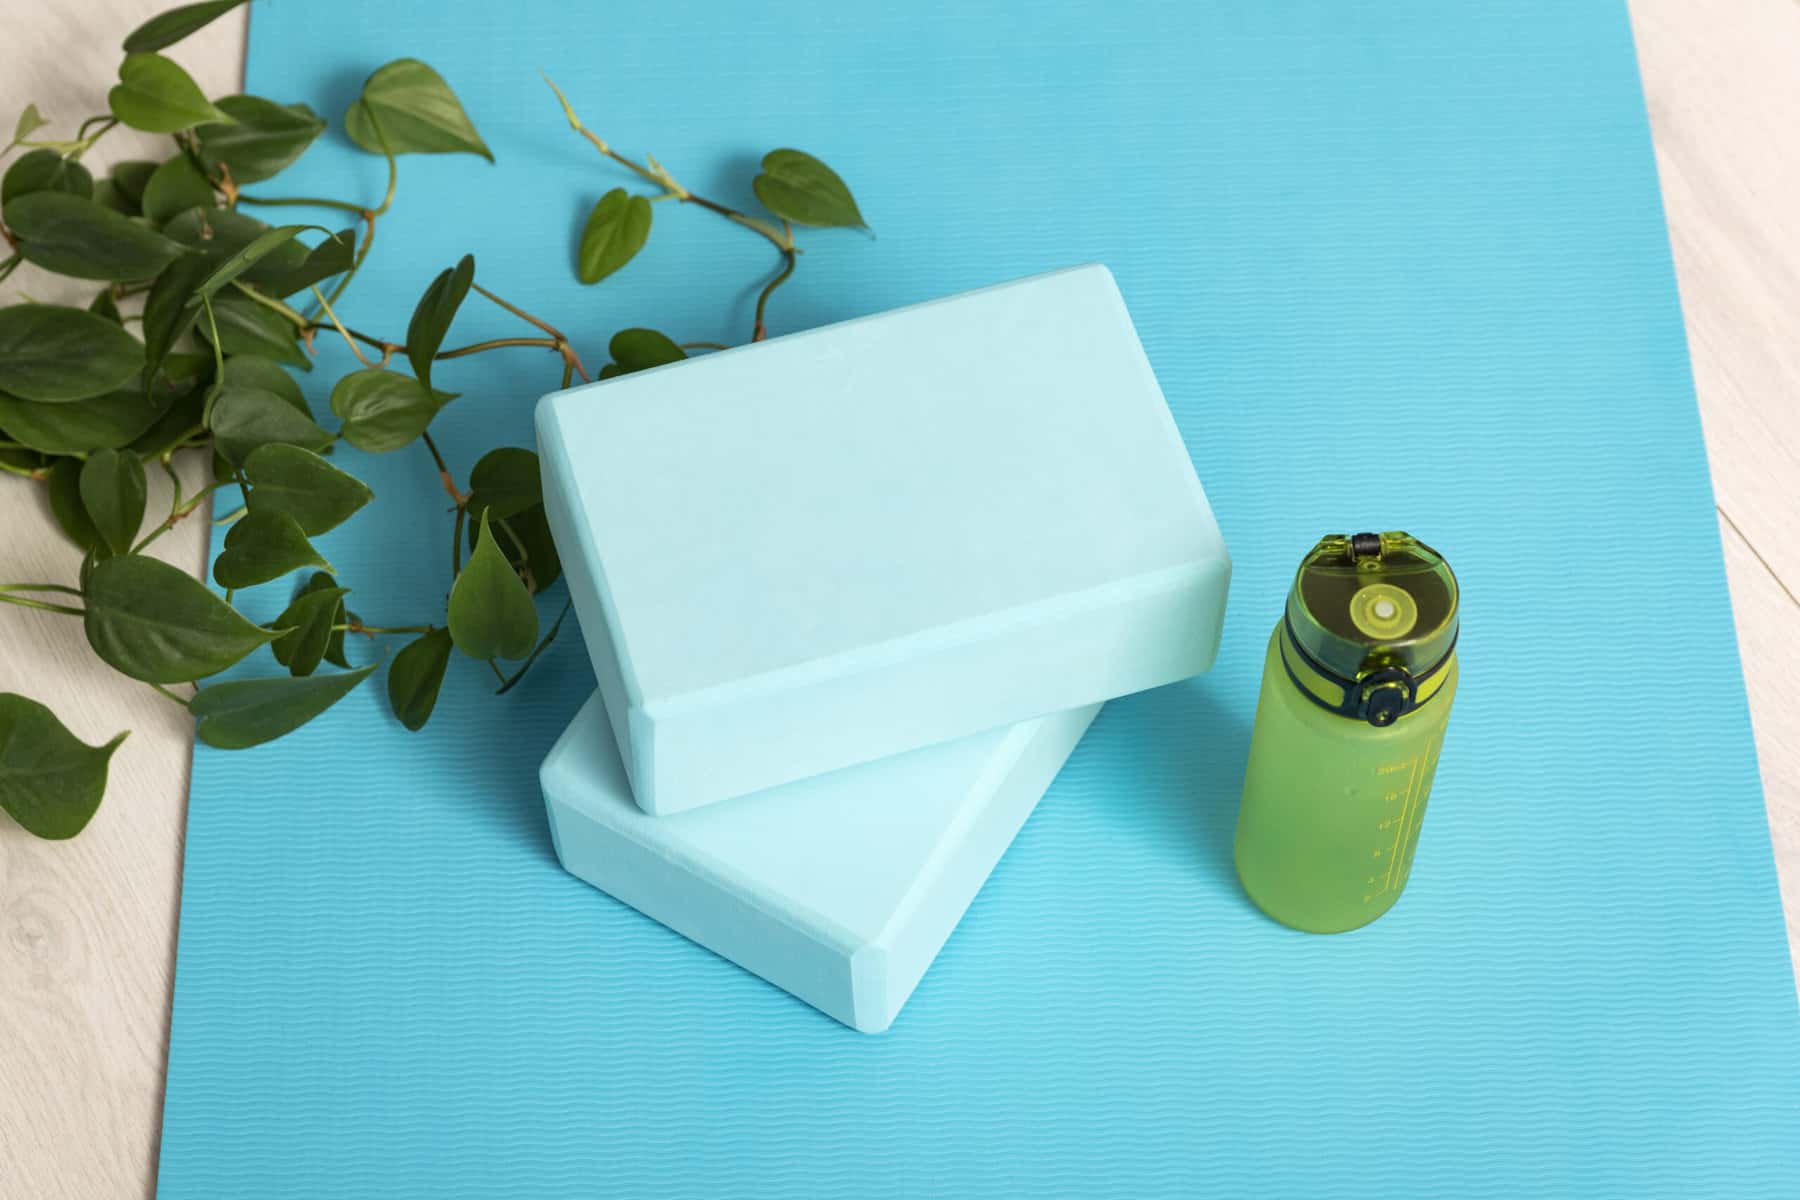 A cropped image of a bright blue yoga mat with two light blue yoga blocks, a green water bottle, and a plant on a light wood floor.